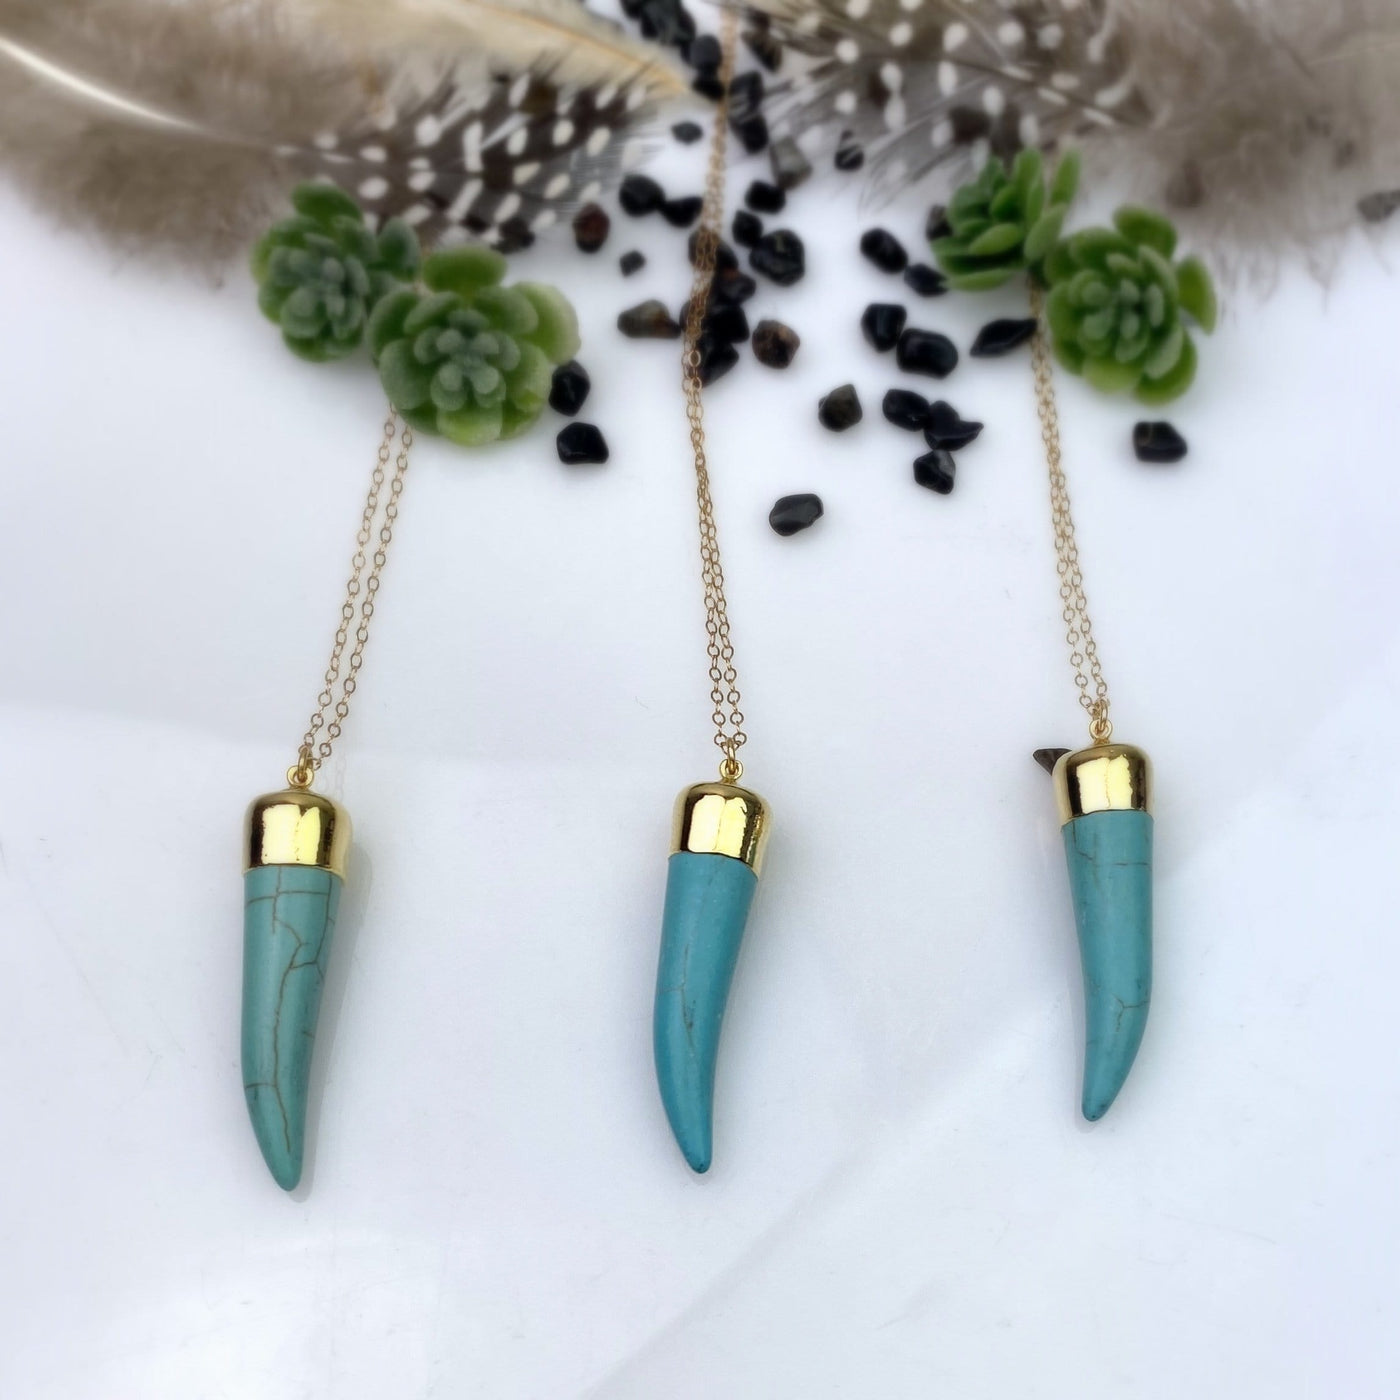 multiple Turquoise Howlite Horn Necklace in Electroplated in 24k Gold on gold fill chain 1.3mm displayed on white background showing various color shades and patterns